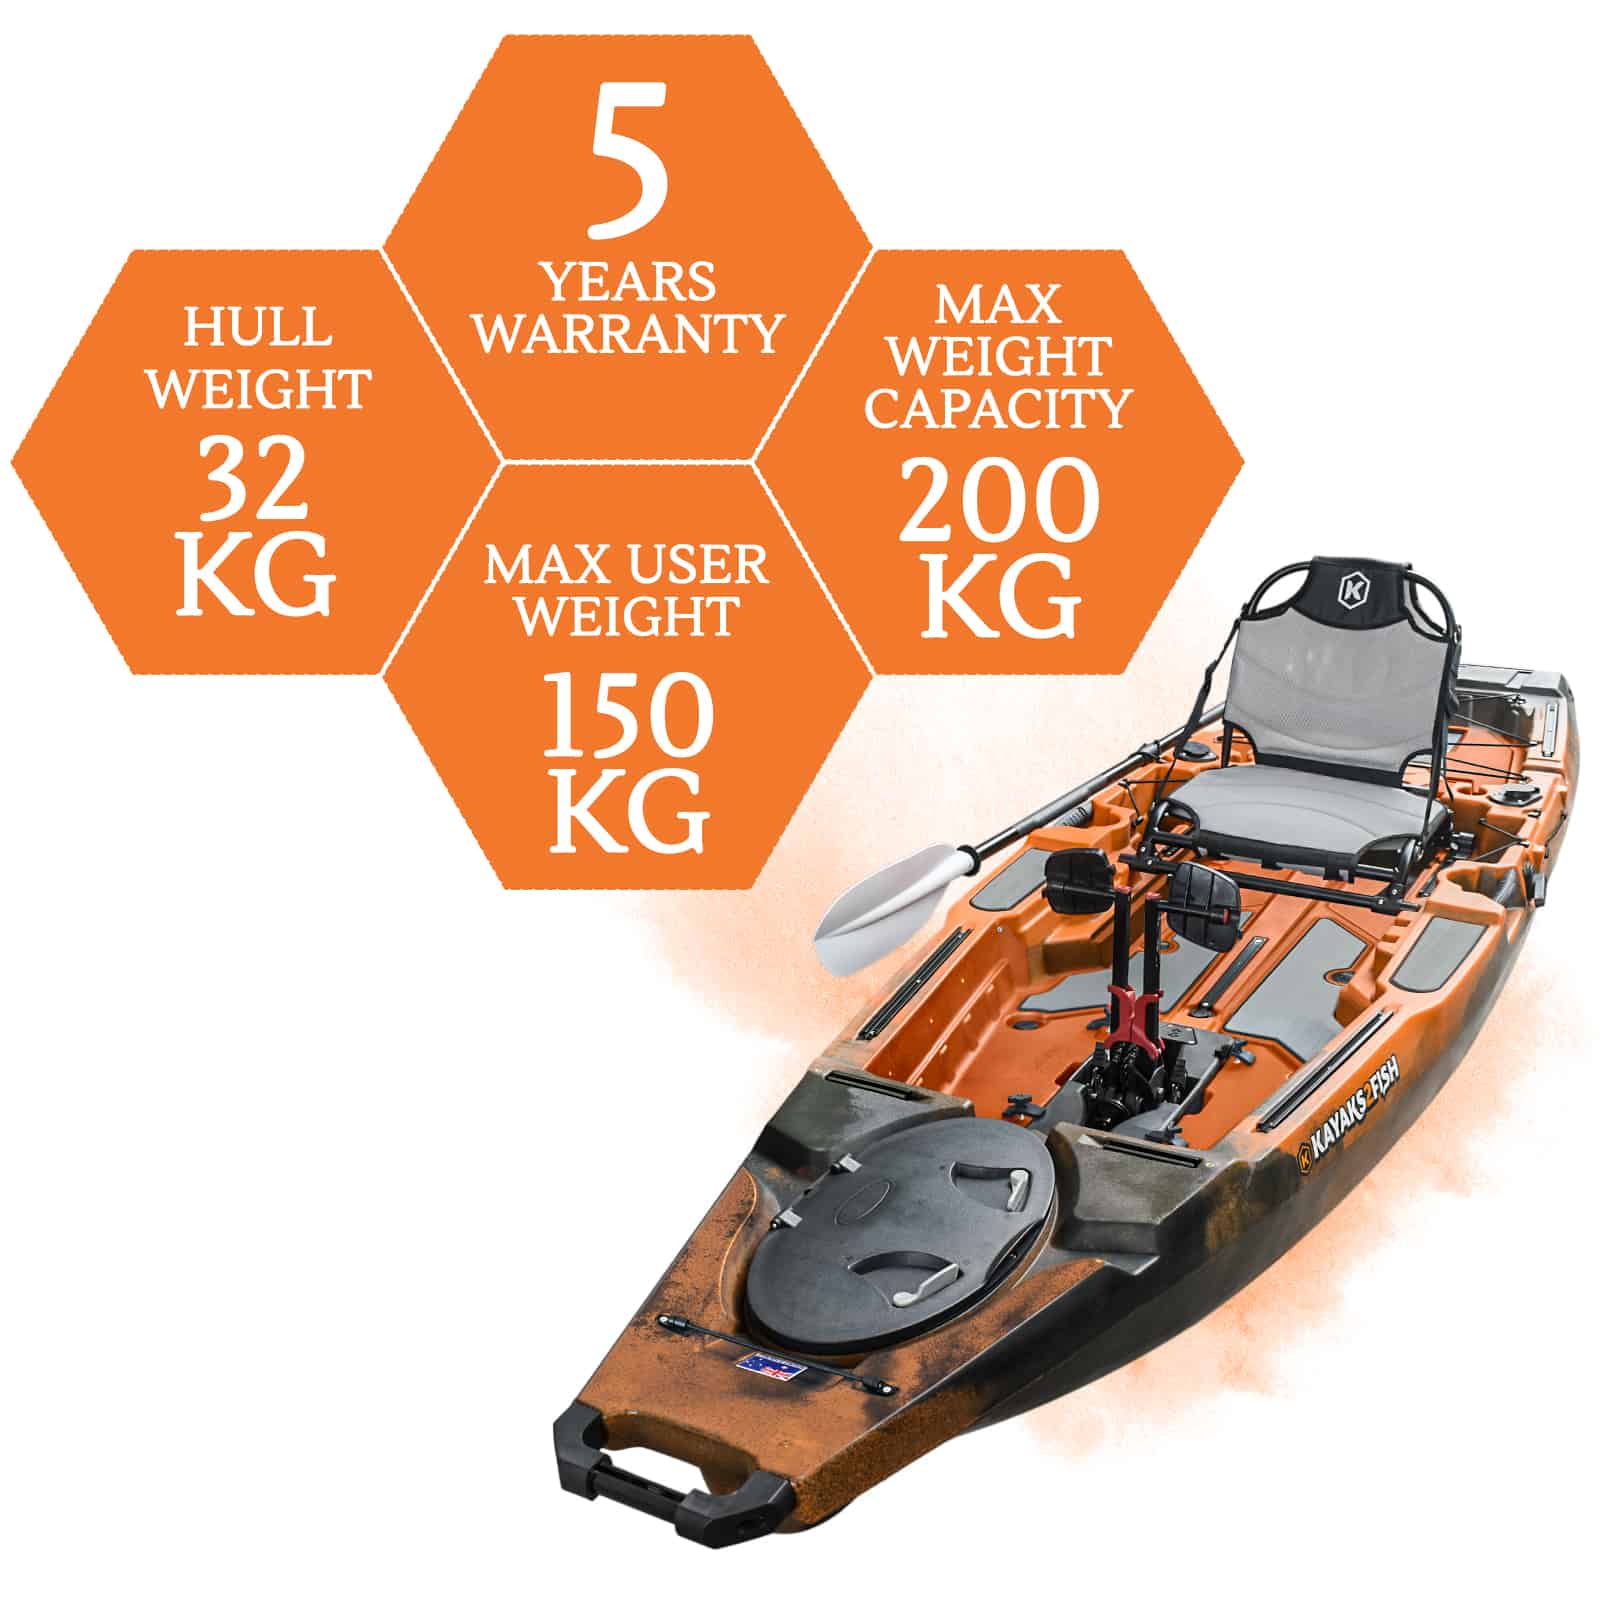 NG-11.5-CORAL-MAX specifications